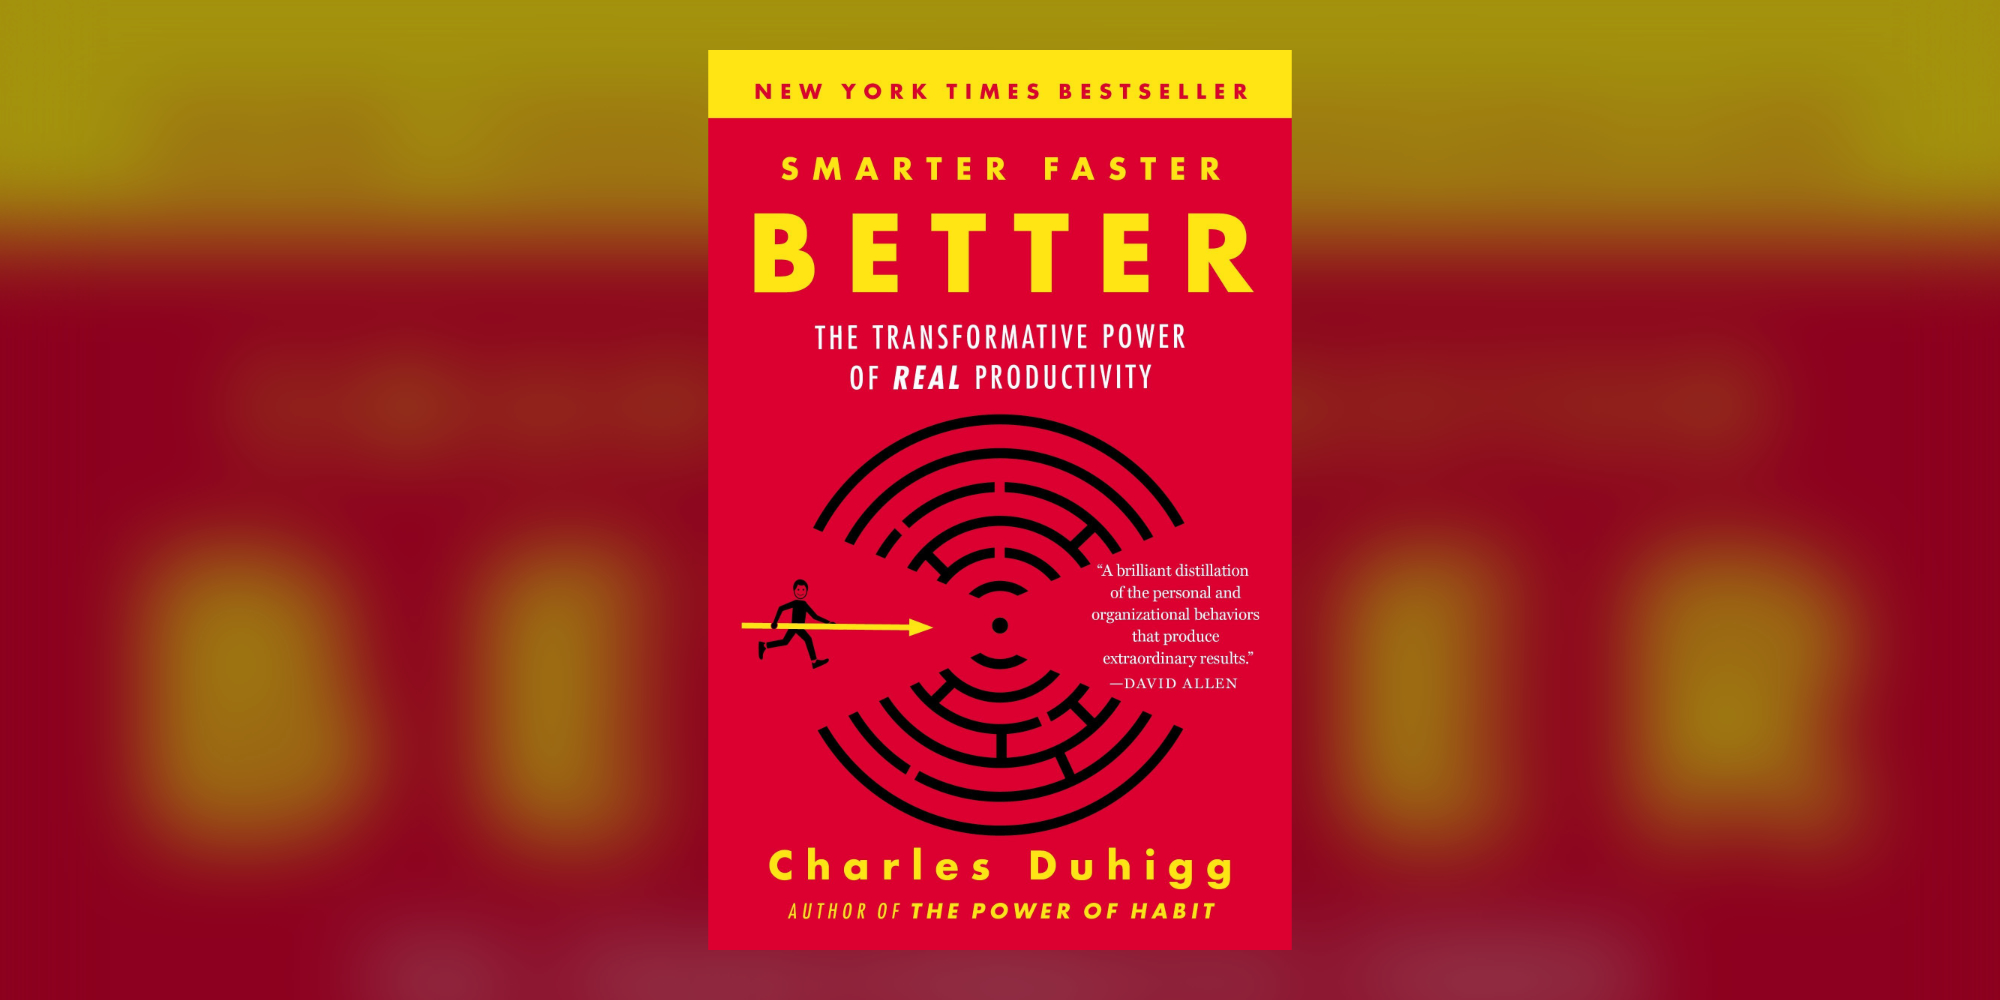 smarter faster better book review